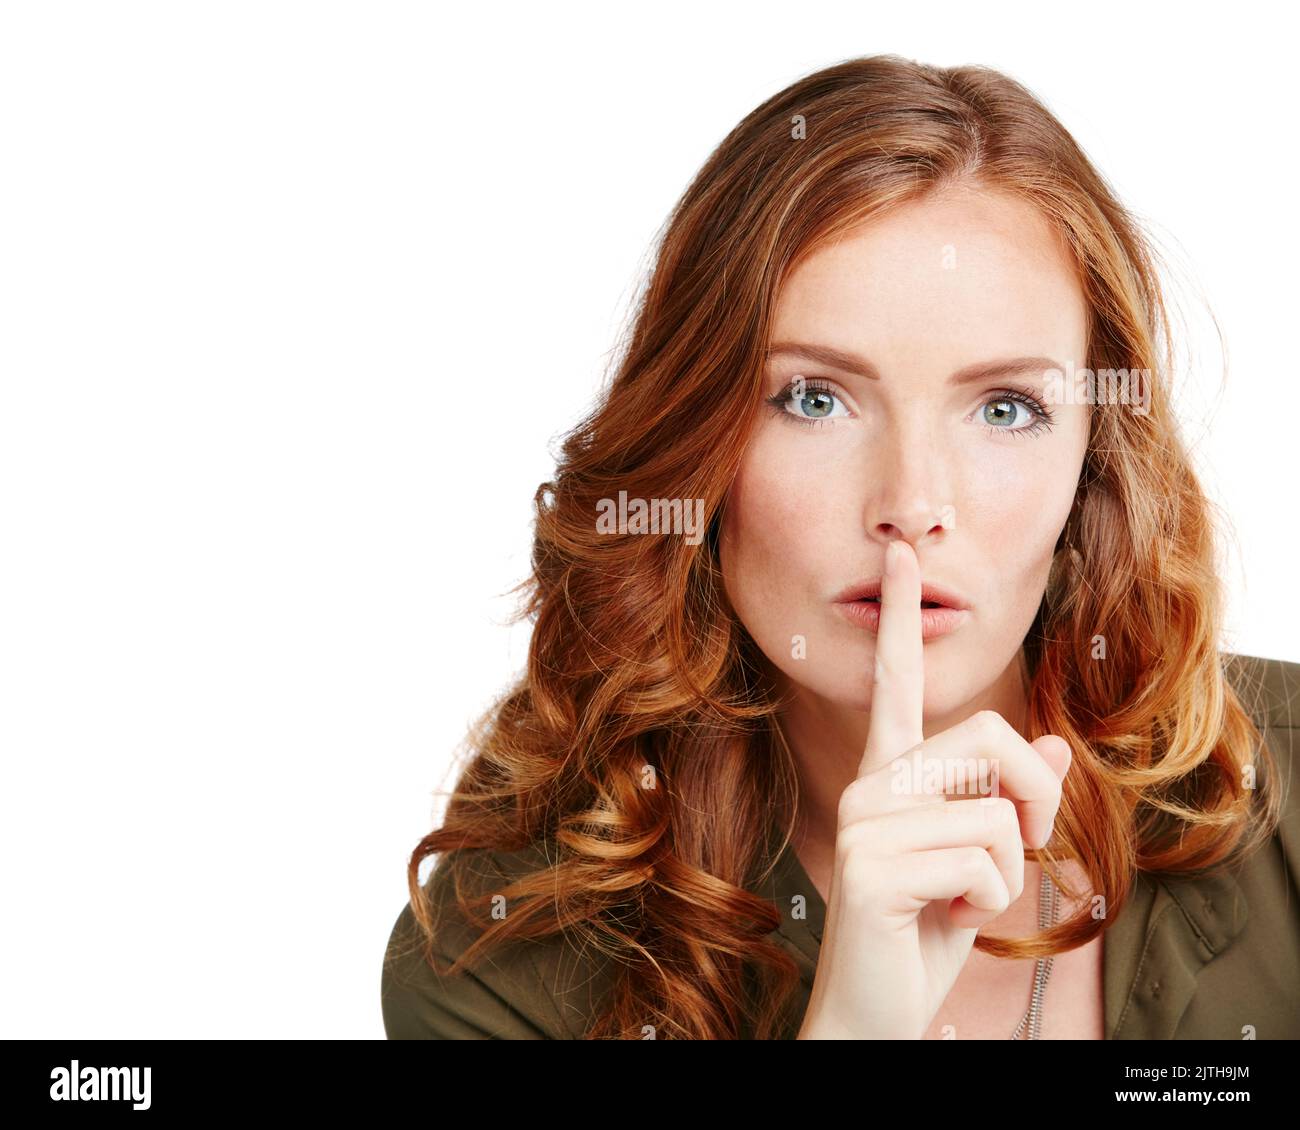 I hope you can keep a secret. Studio shot of a young woman posing with her finger on her lips. Stock Photo